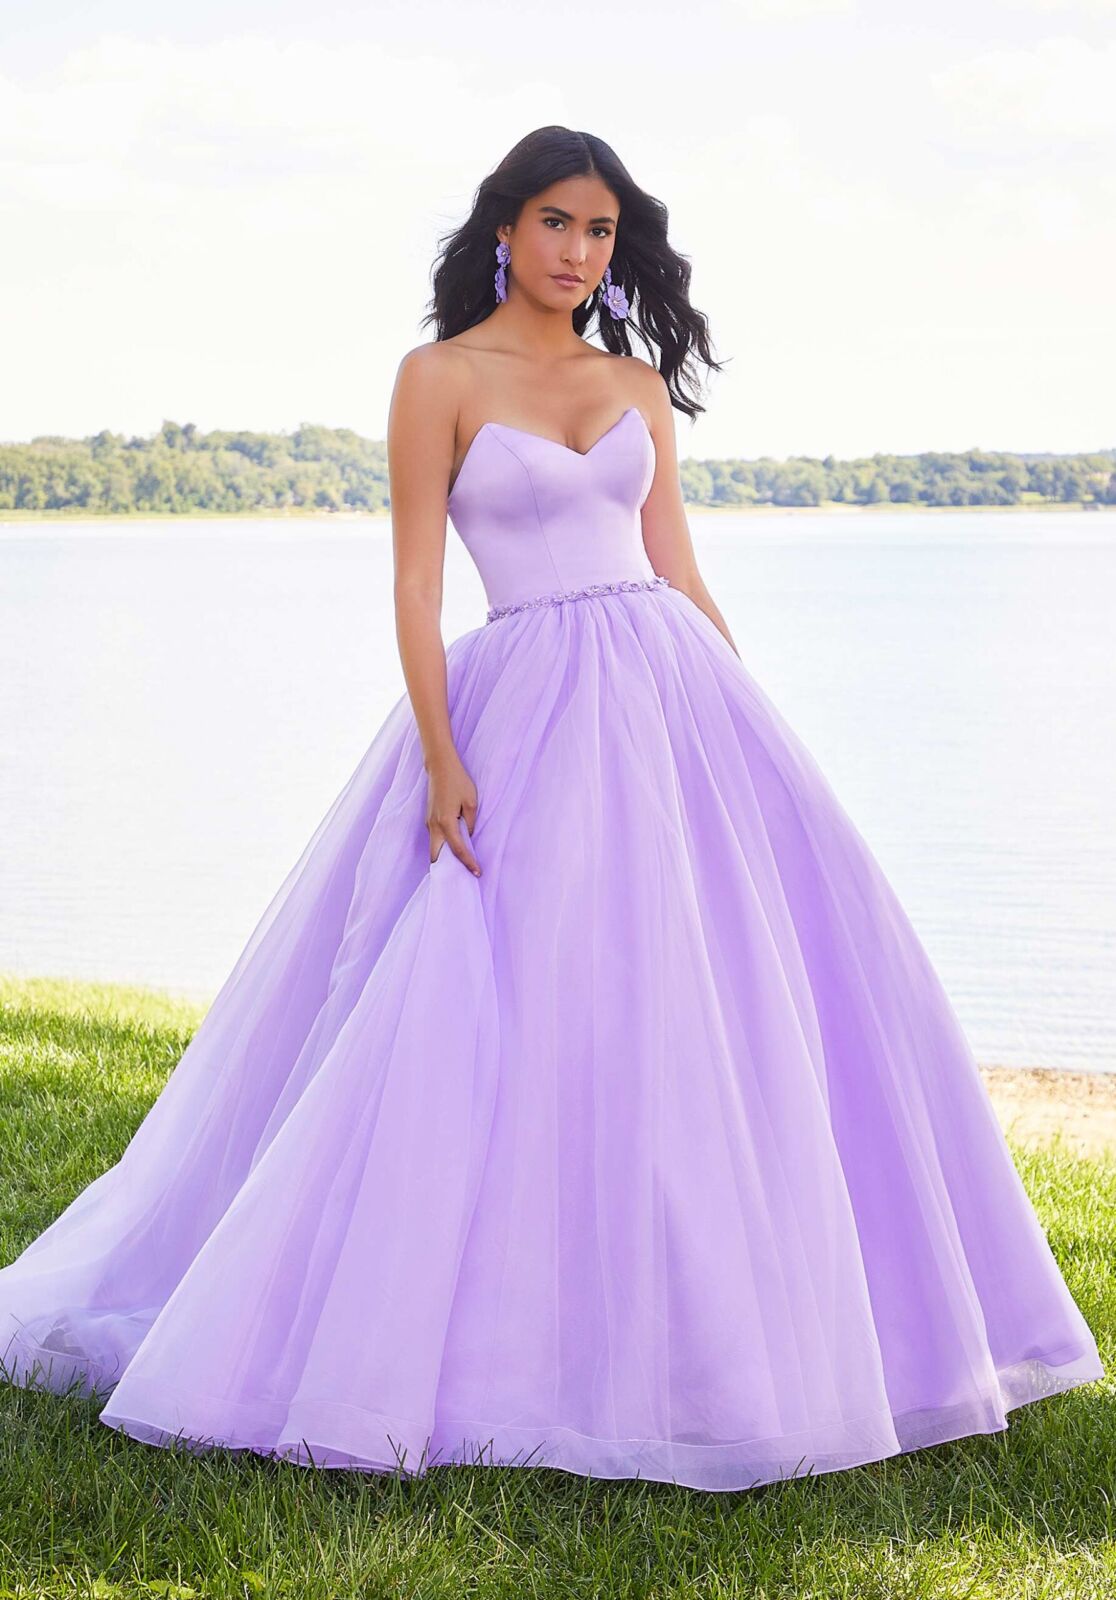 Buy Women Lavender Wedding Bridesmaid Dresses Off Shoulder Long Sleeve with  Slit Lace Chiffon Prom Formal Dress at Amazon.in